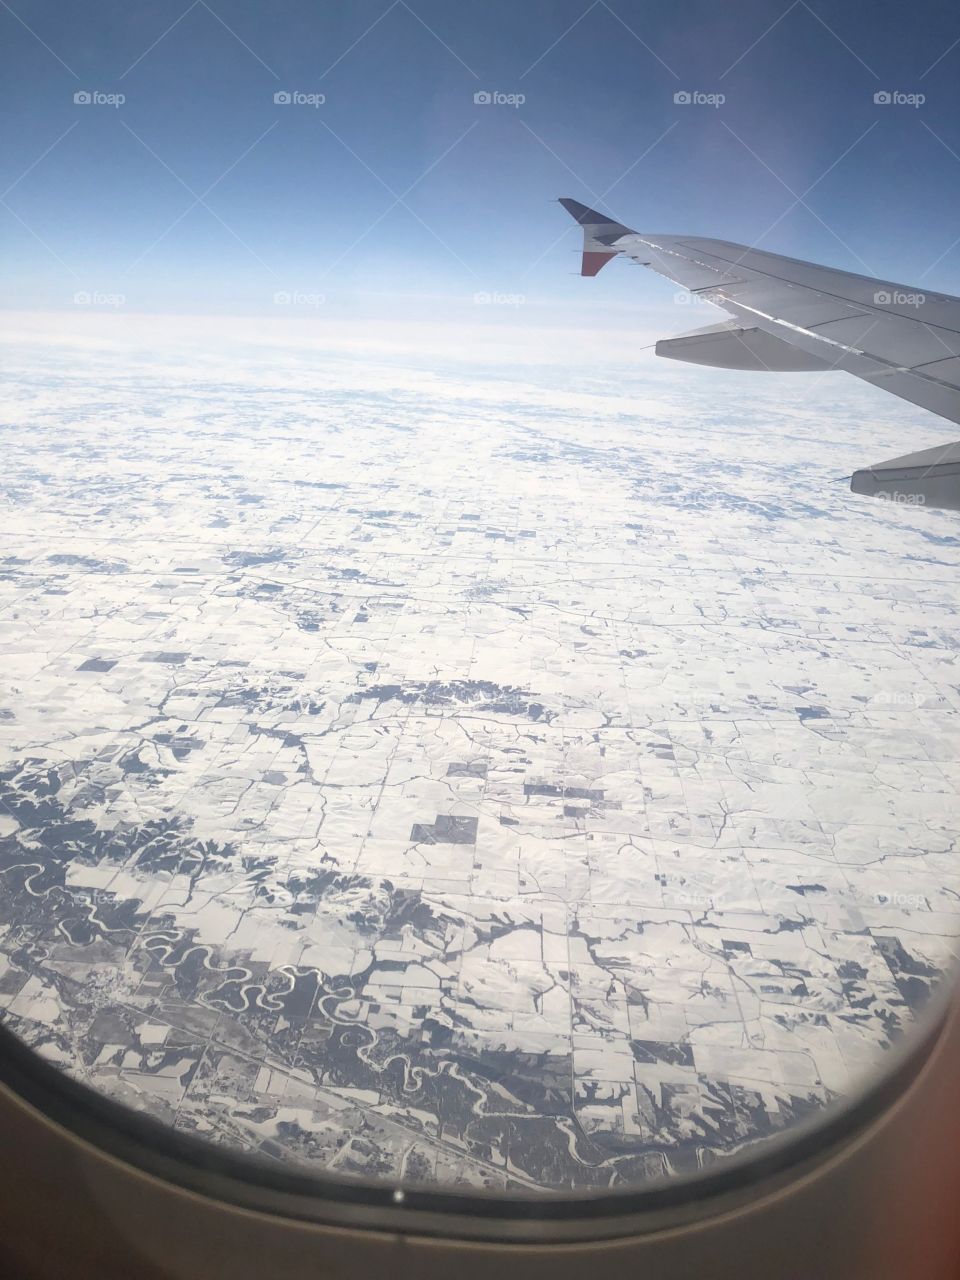 Flying over to Las Vegas from New York sore this view , snow everywhere.